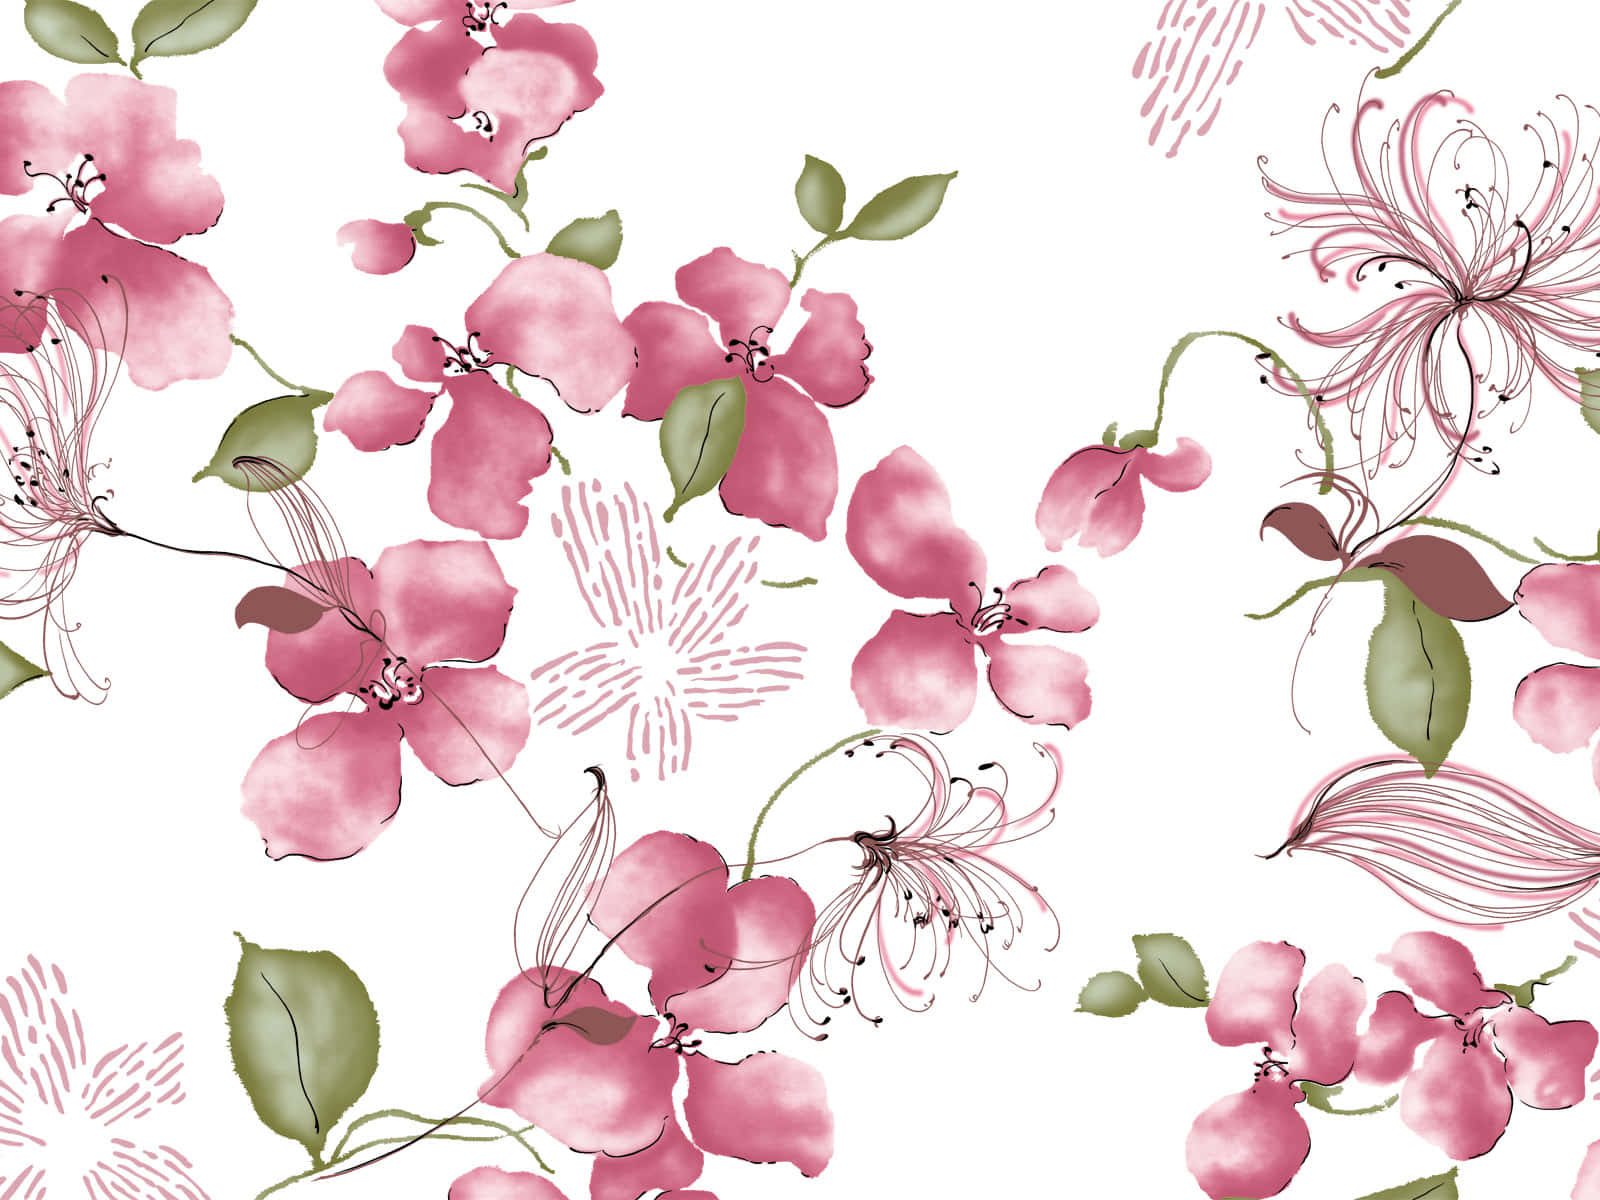 A Pink Floral Pattern With Leaves And Flowers